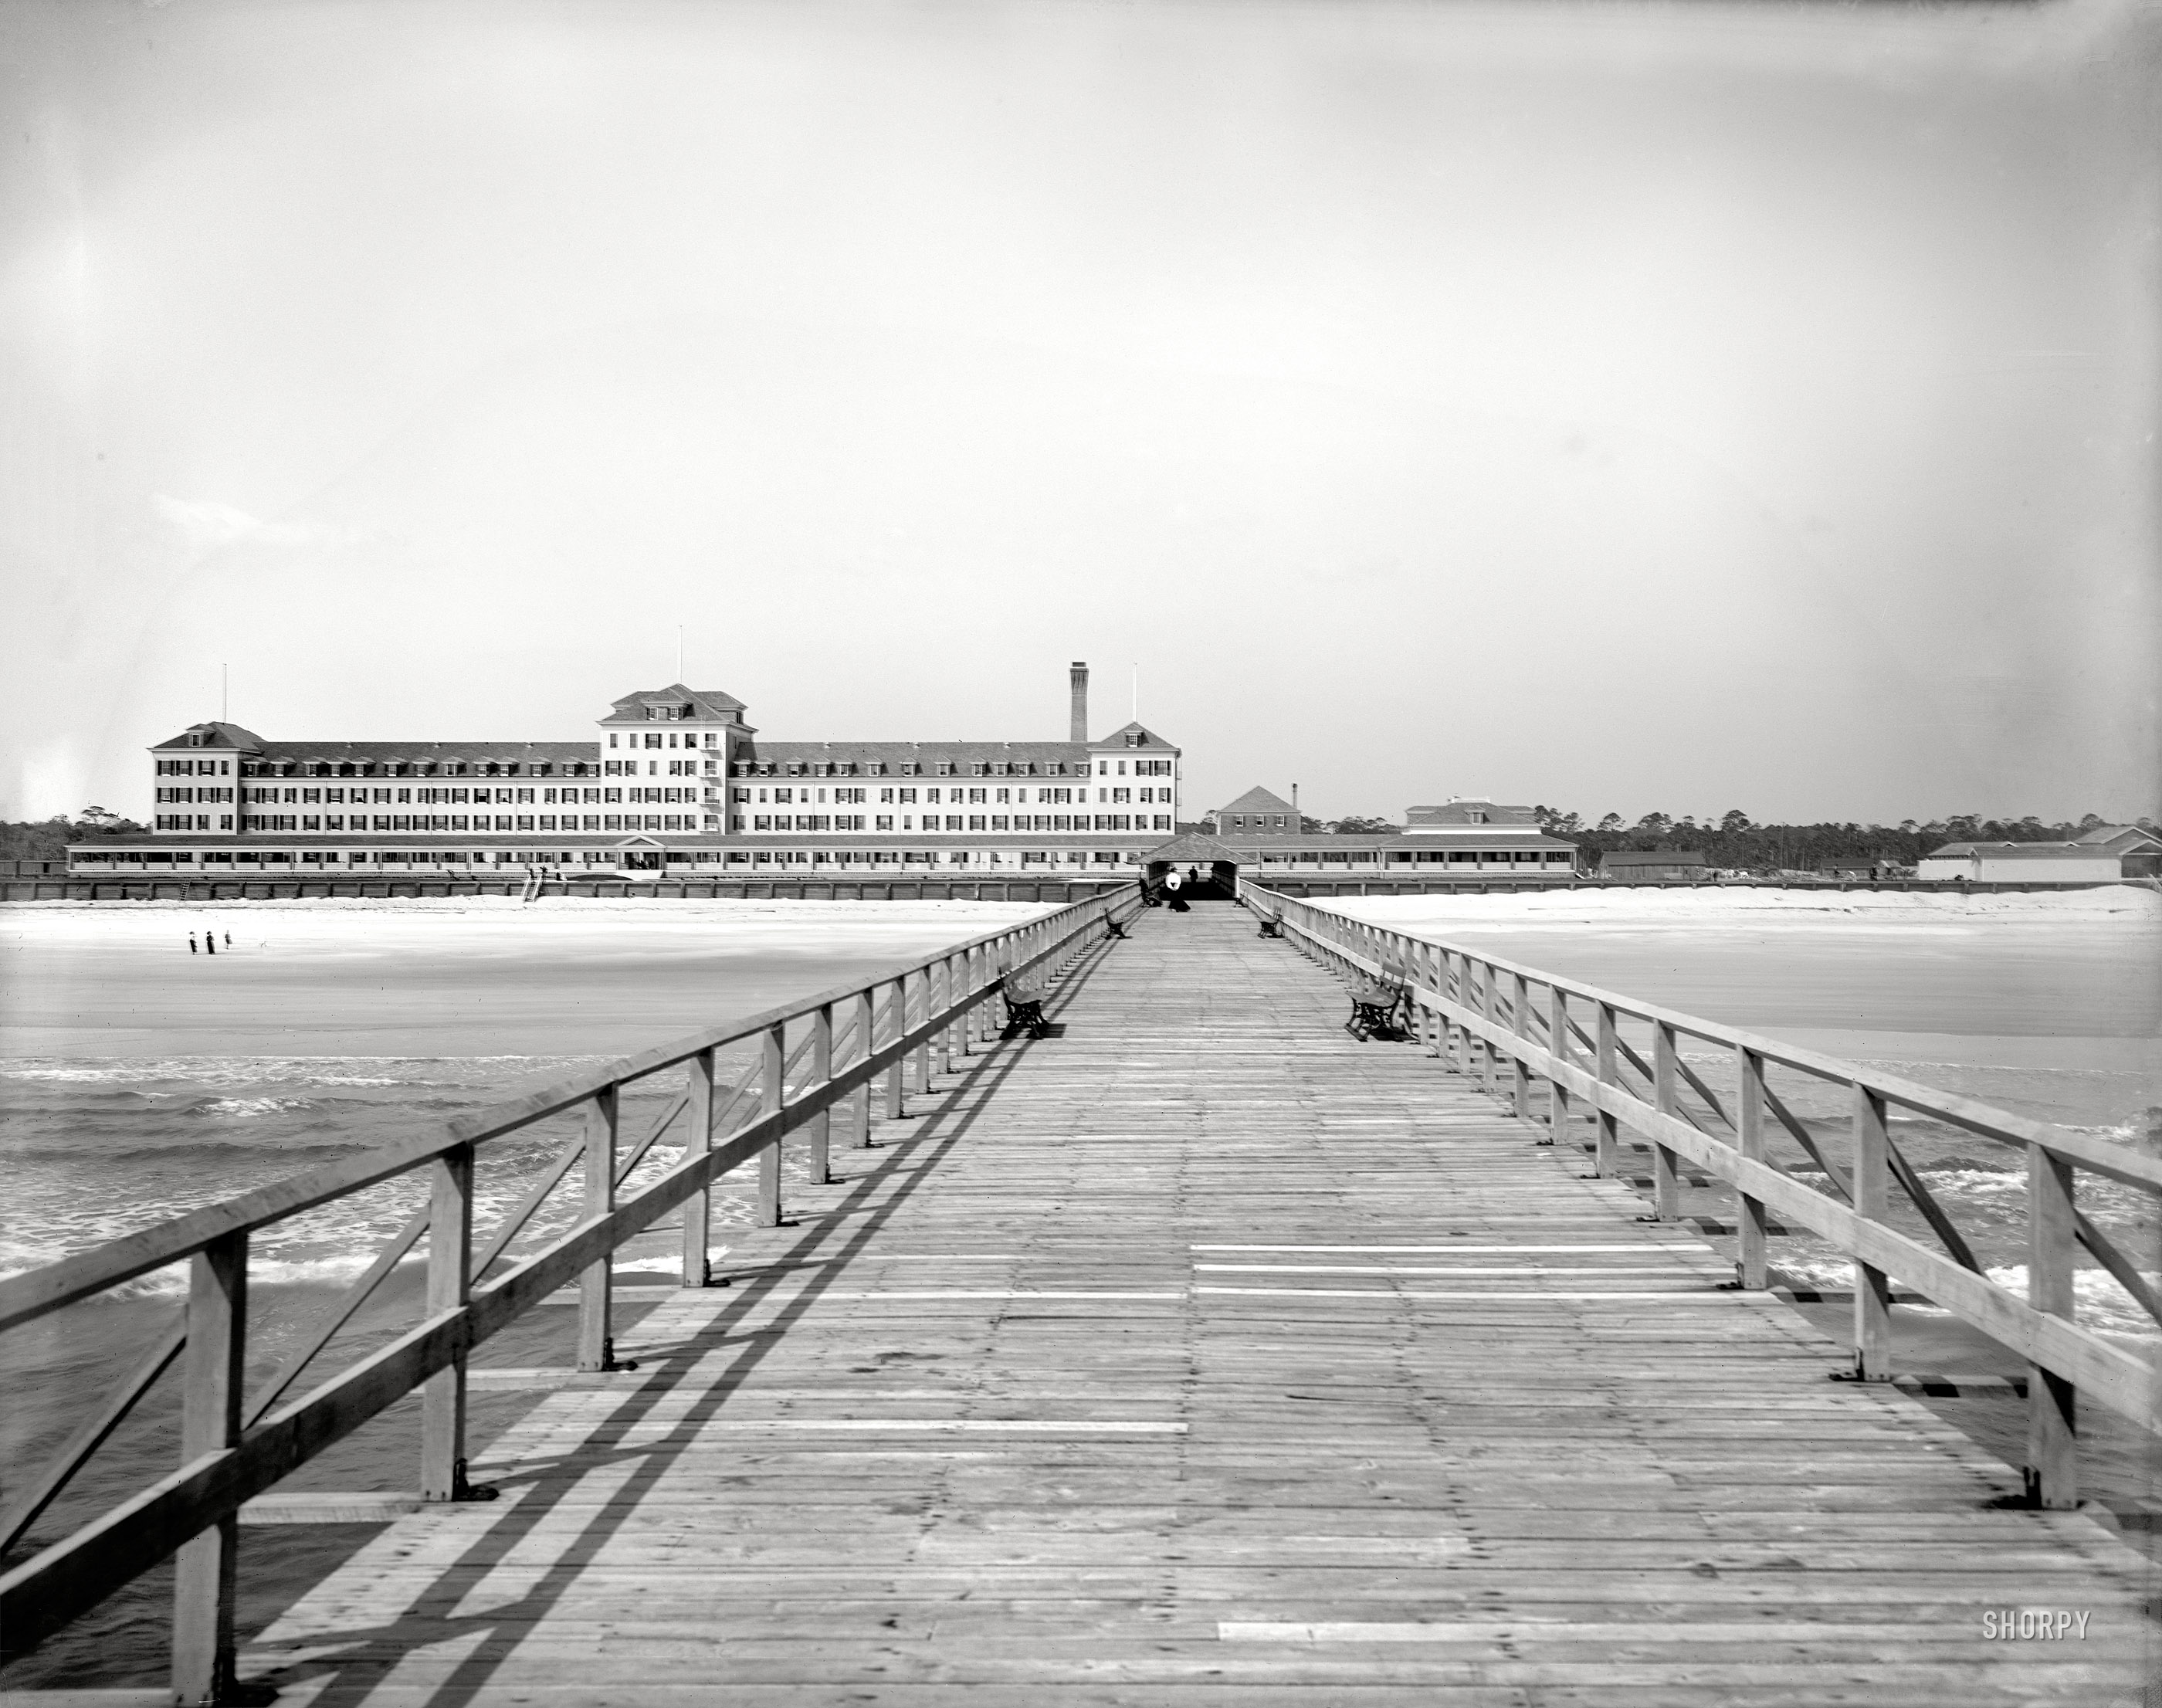 1902. "Hotel Continental -- Atlantic Beach, Florida." Henry Flagler's massive wood-frame hostelry opened in 1901 and burned in 1919. 8x10 inch dry plate glass negative by William Henry Jackson, Detroit Publishing Co. View full size.